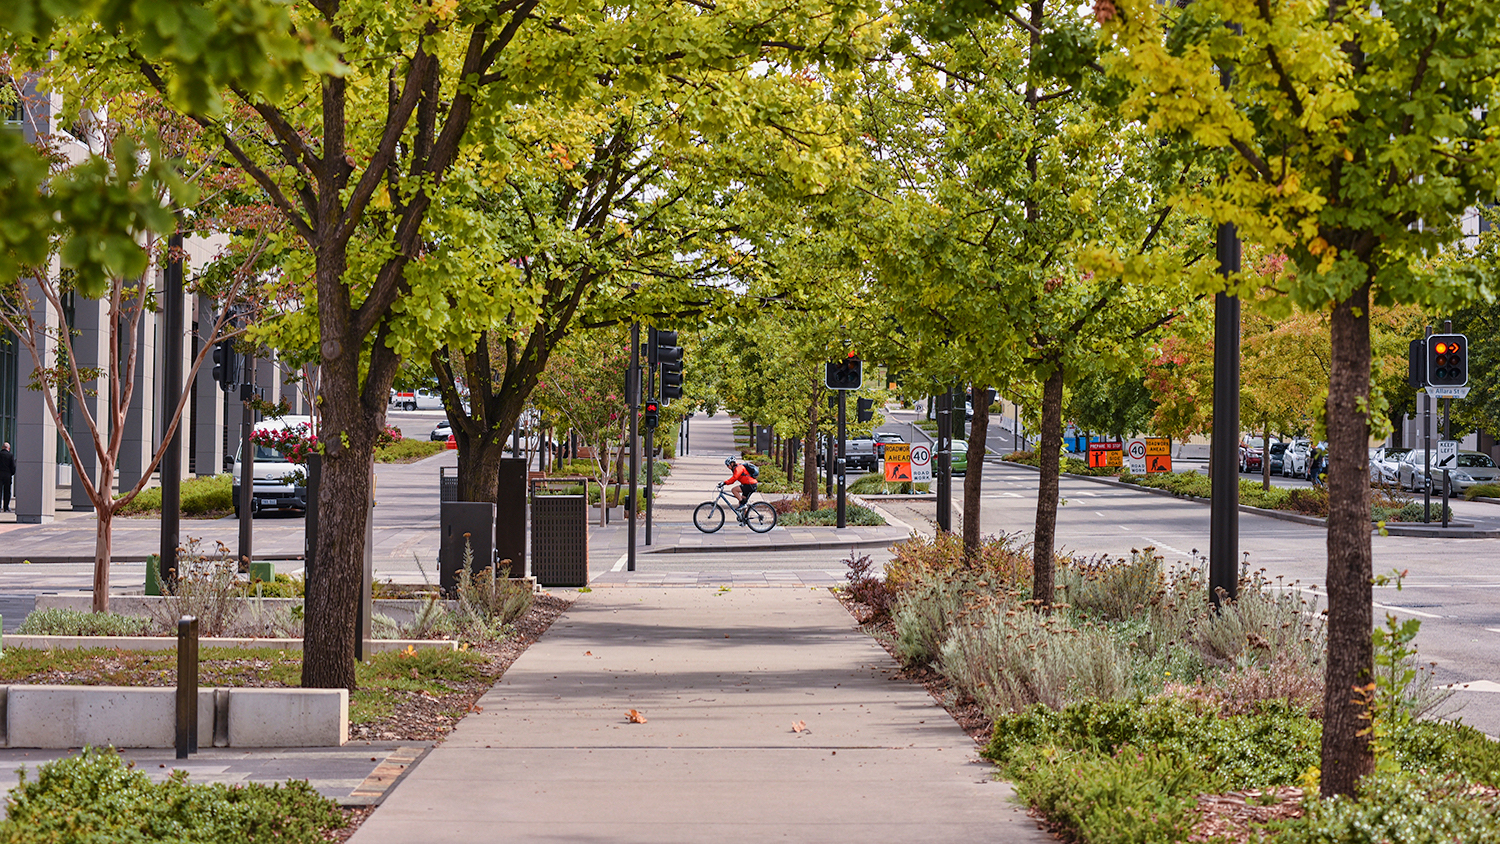 A person cycling through a city - 5 Benefits of Urban Forests - College of Natural Resources News